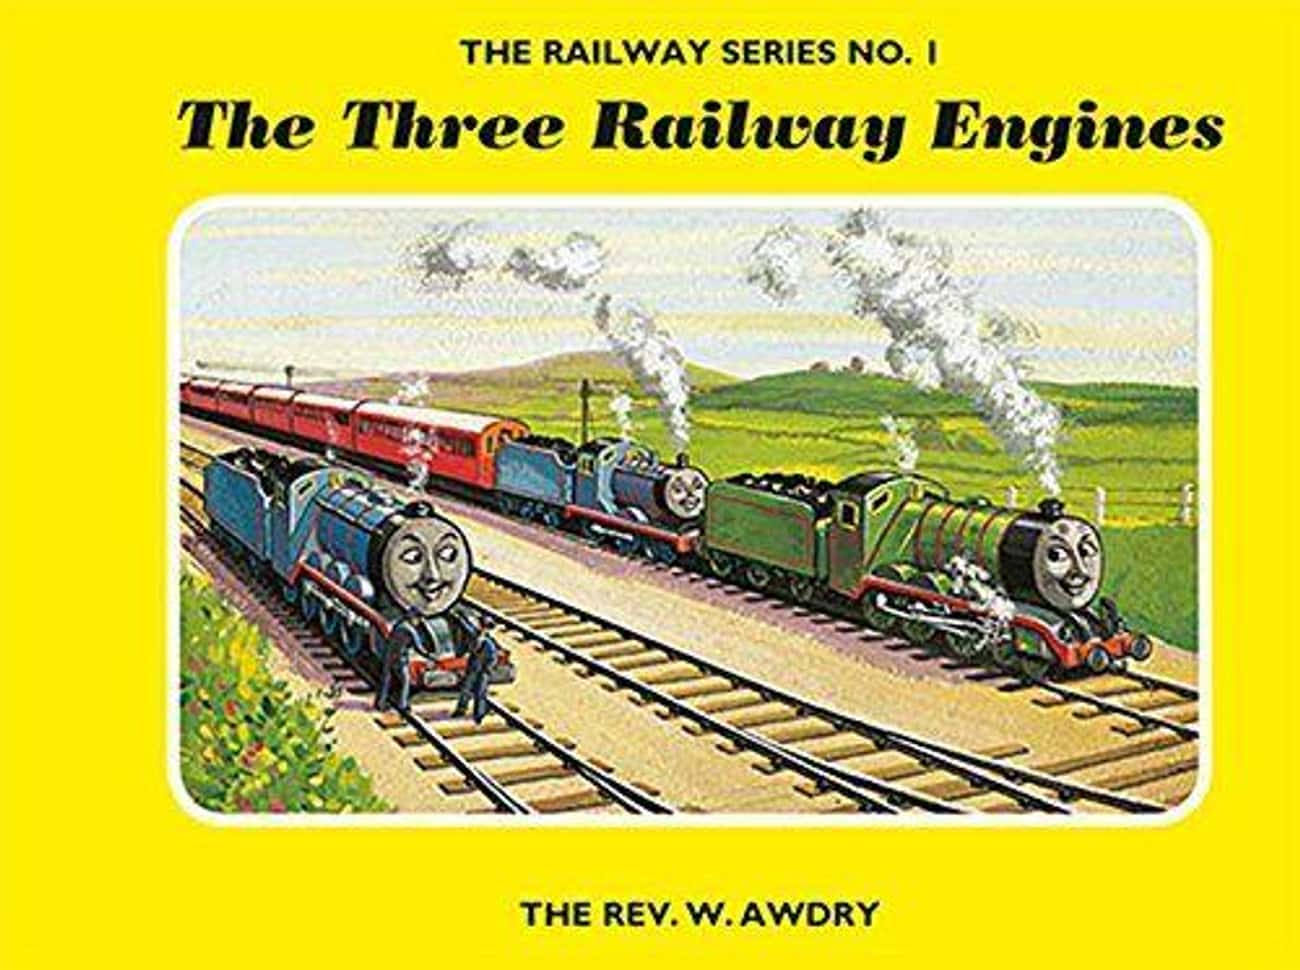 Awdry Created 'Thomas The Tank Engine' For His Sick Son